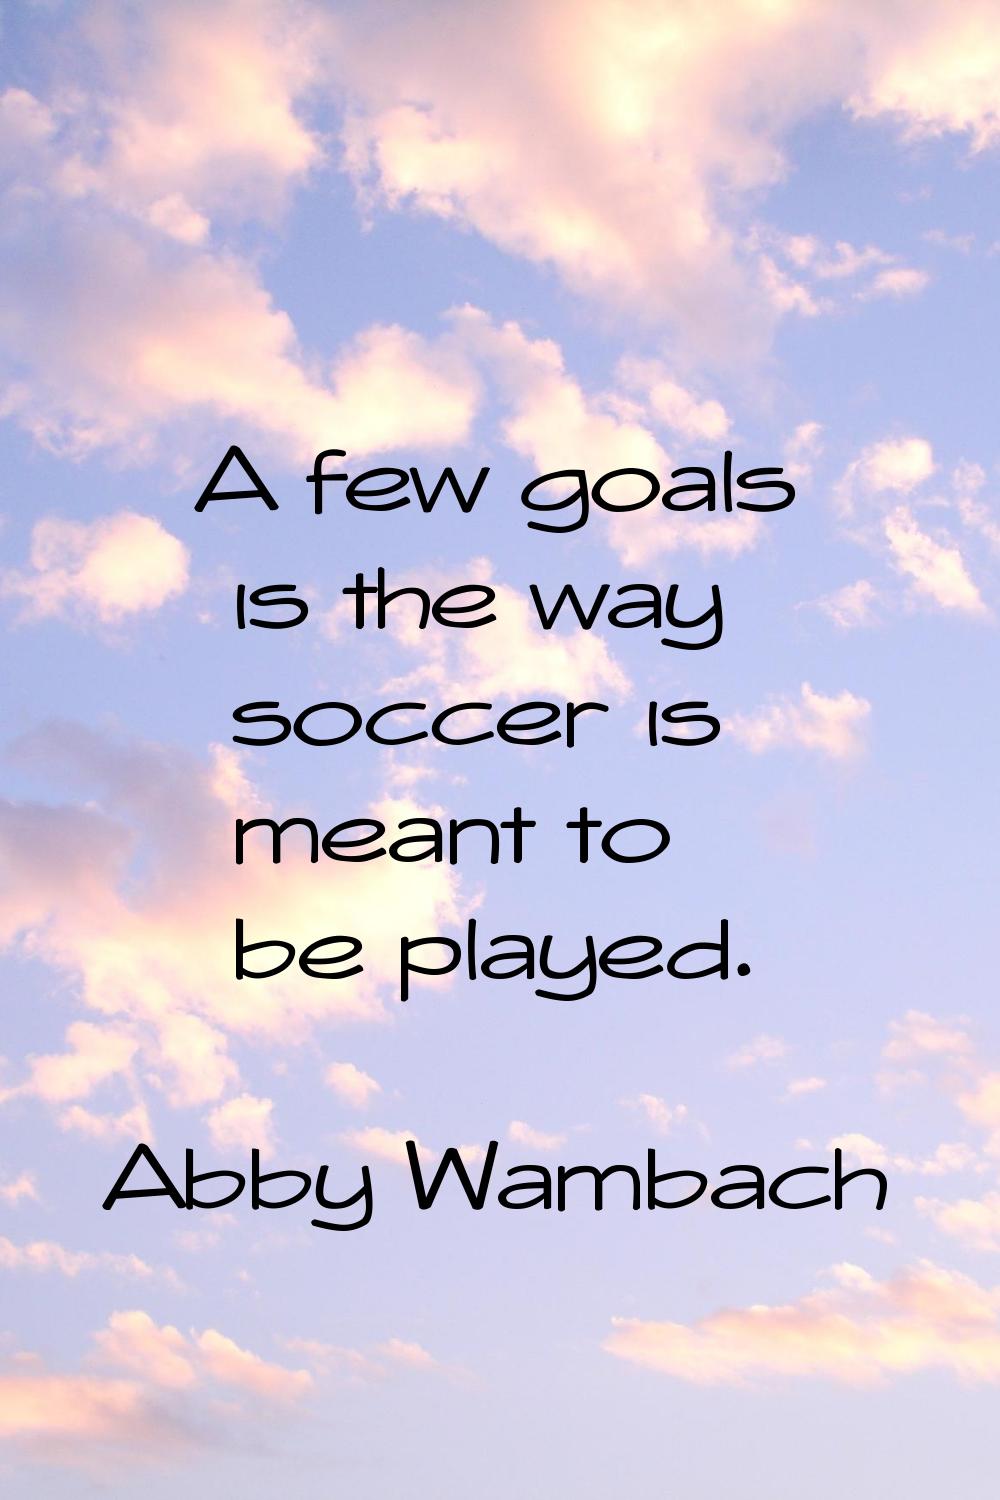 A few goals is the way soccer is meant to be played.